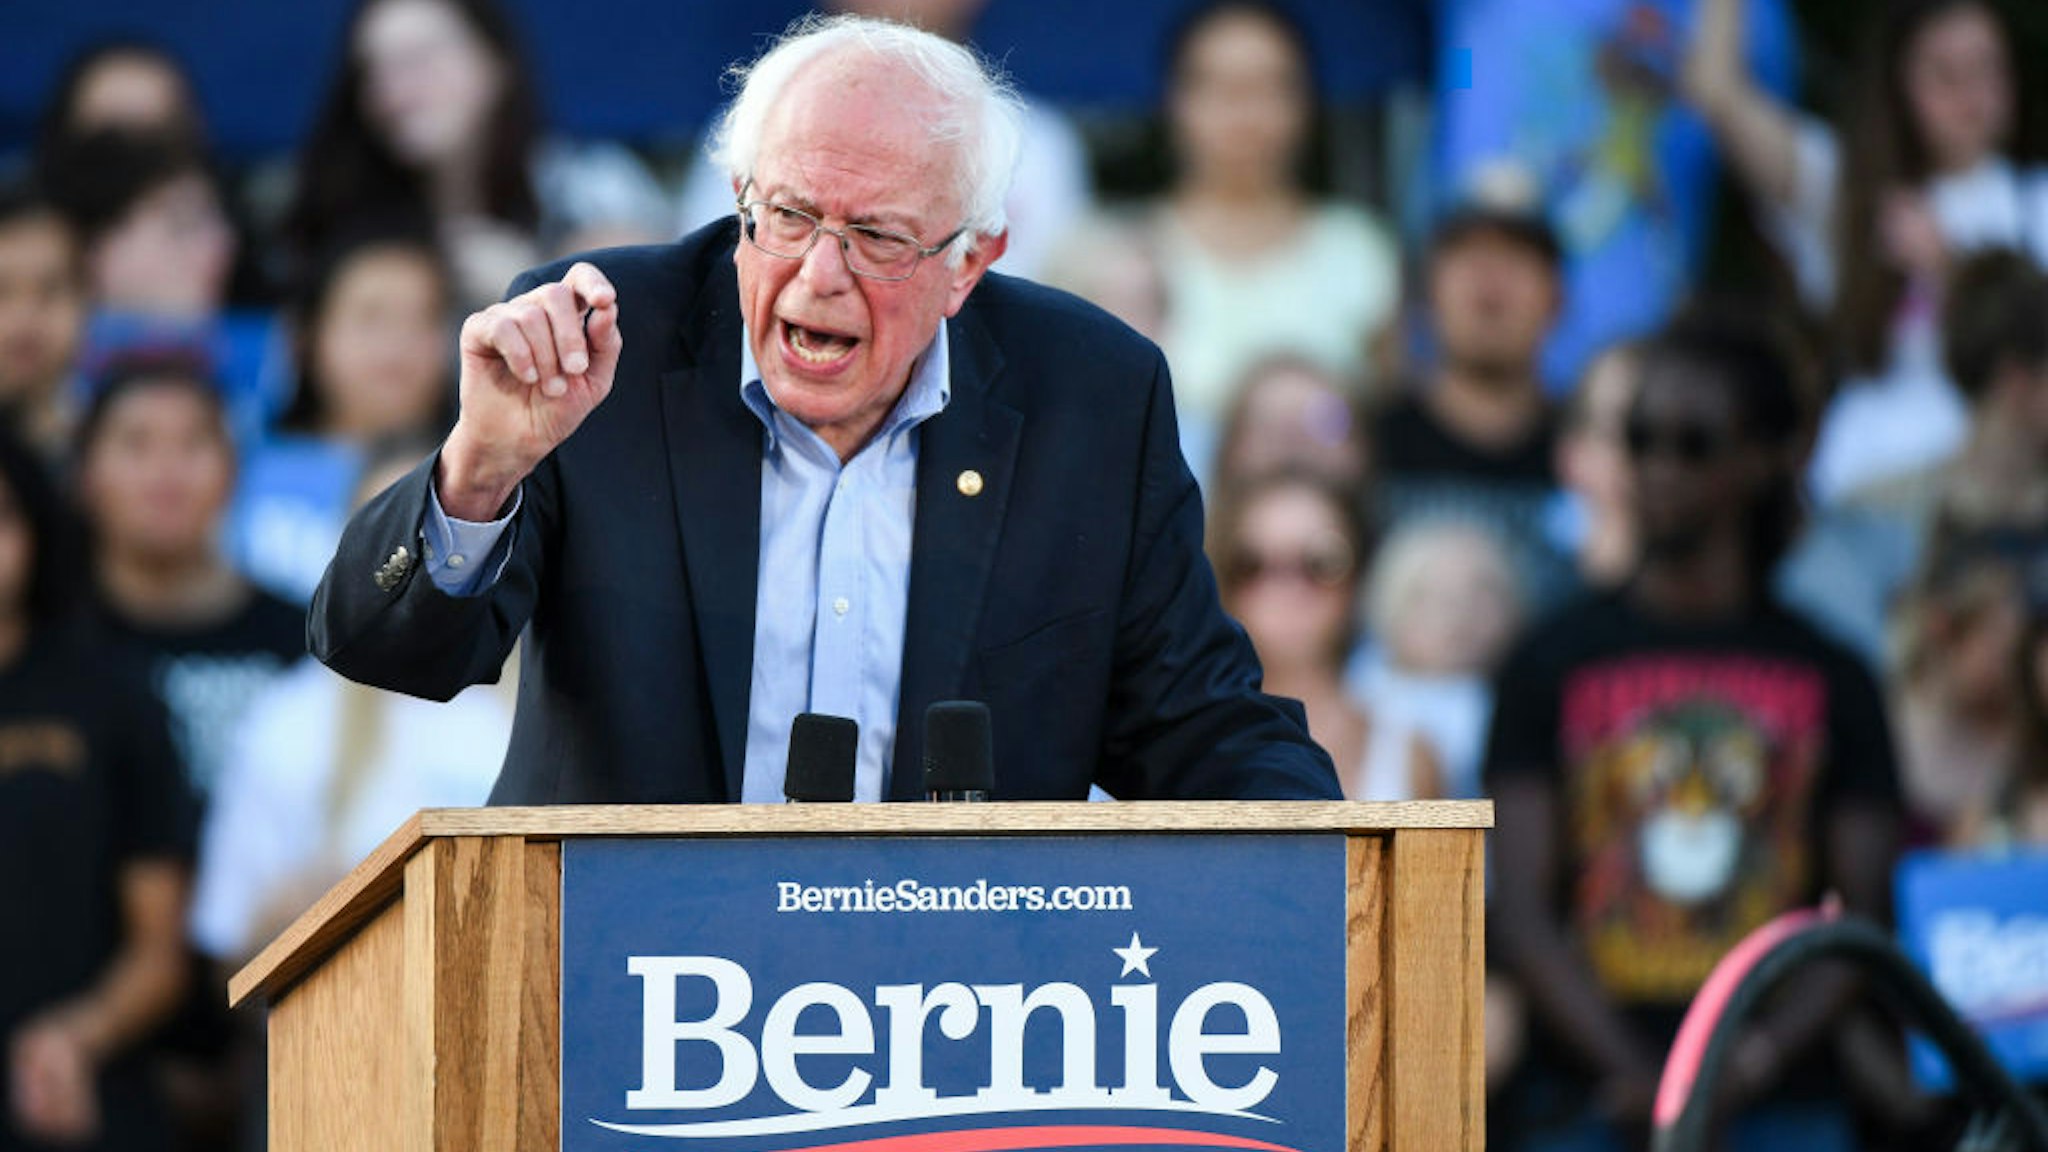 Democratic presidential candidate Sen. Bernie Sanders (I-VT) speaks to supporters at a rally at Civic Center Park on September 9, 2019 in Denver, Colorado.